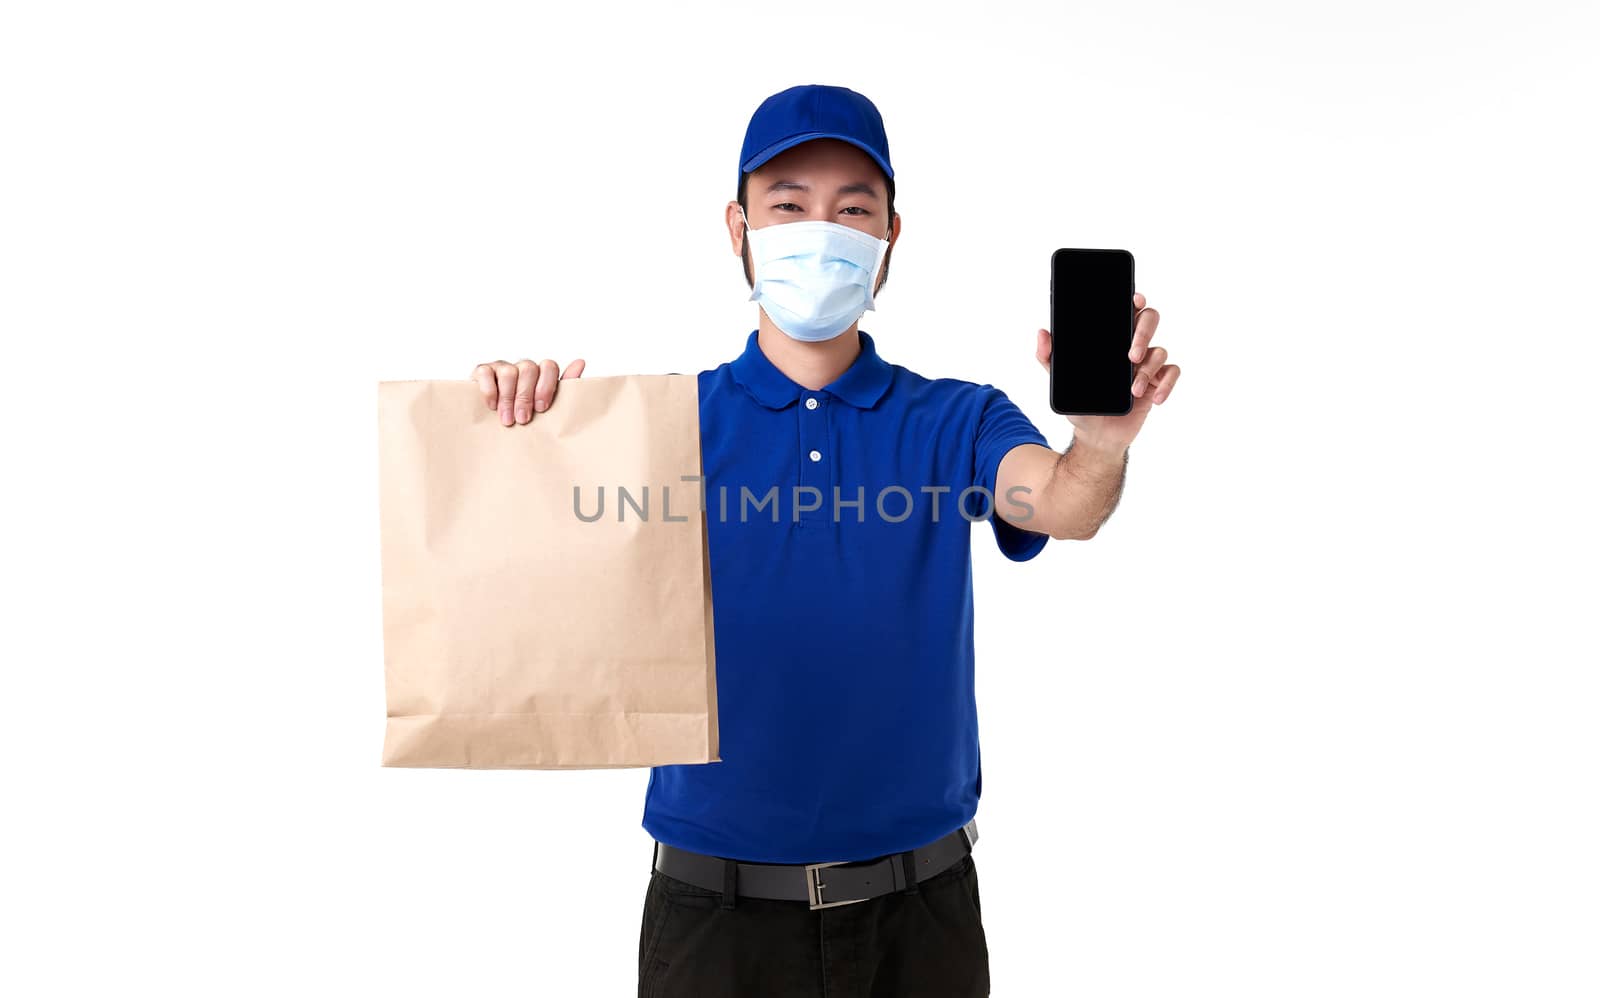 Asian delivery man wearing face mask in blue uniform with smart phone holding paper bag isolated on white background. express delivery service during covid19.